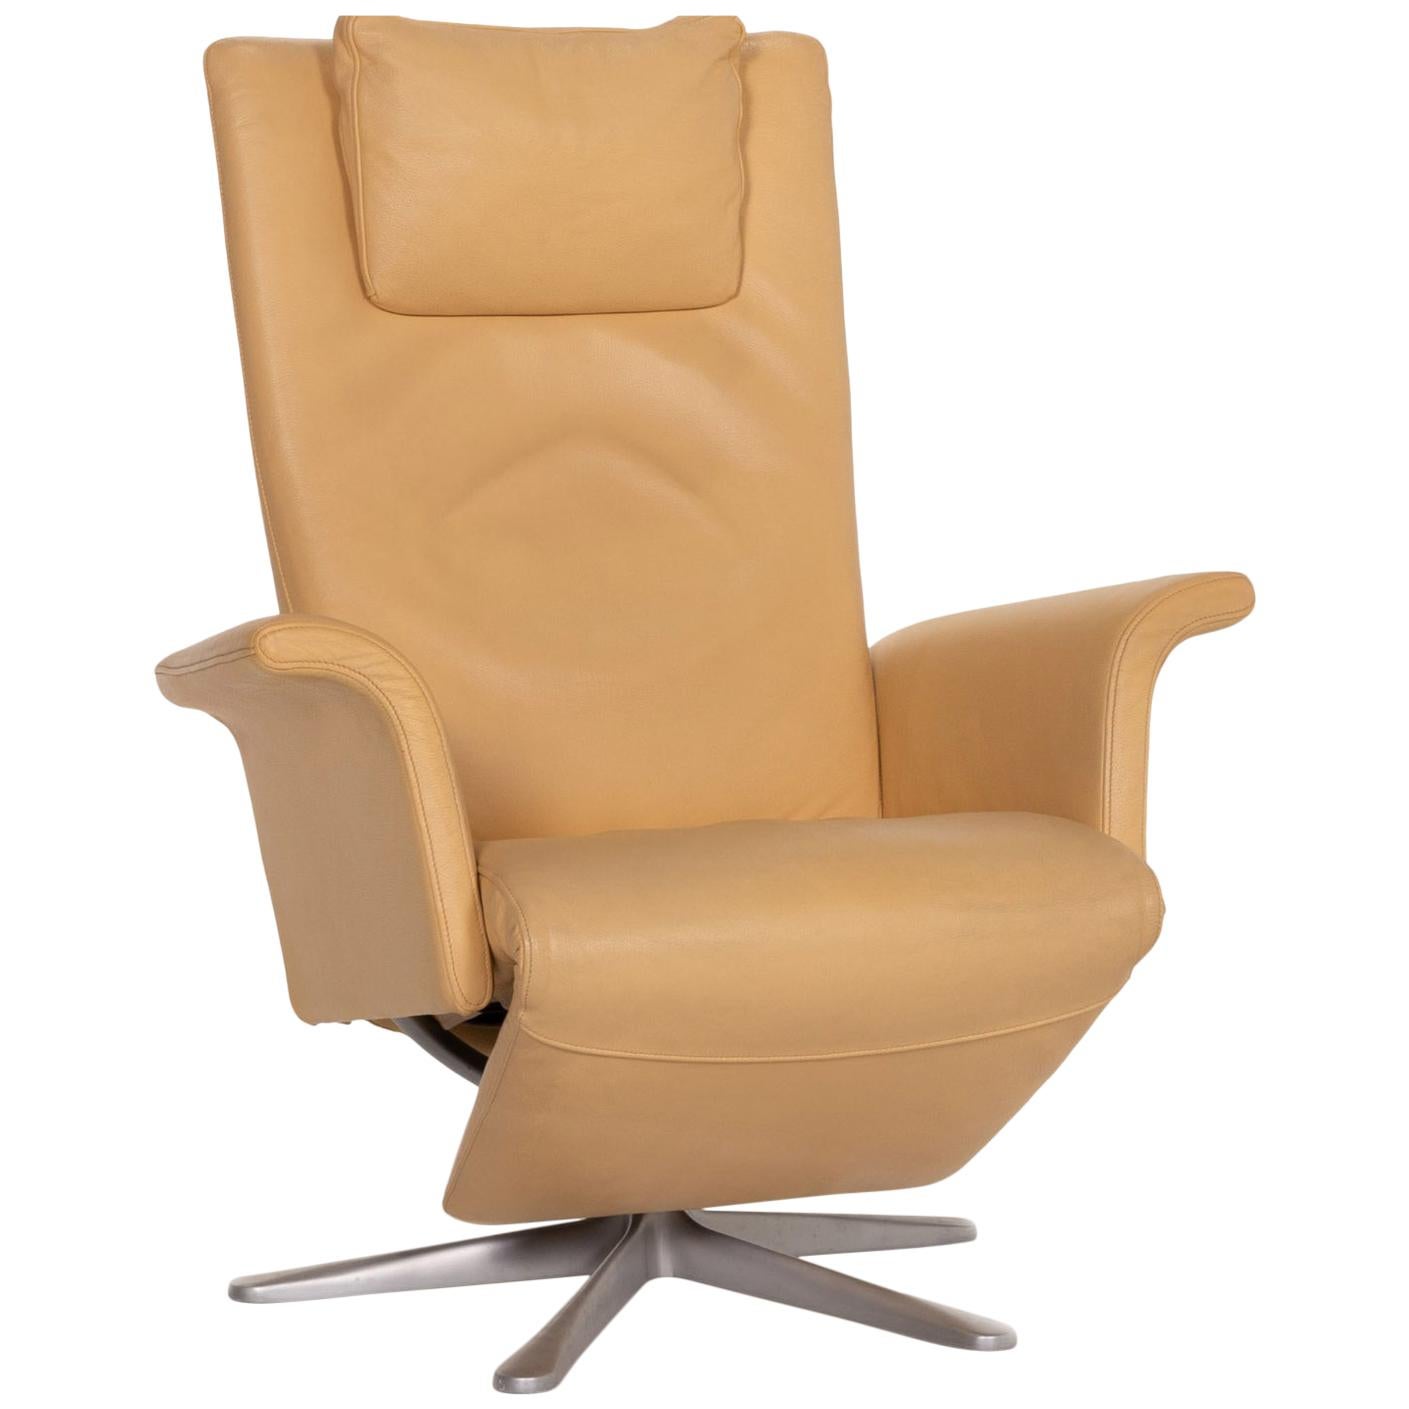 FSM Filou Leather Armchair Beige Relaxation Function Relaxation For Sale